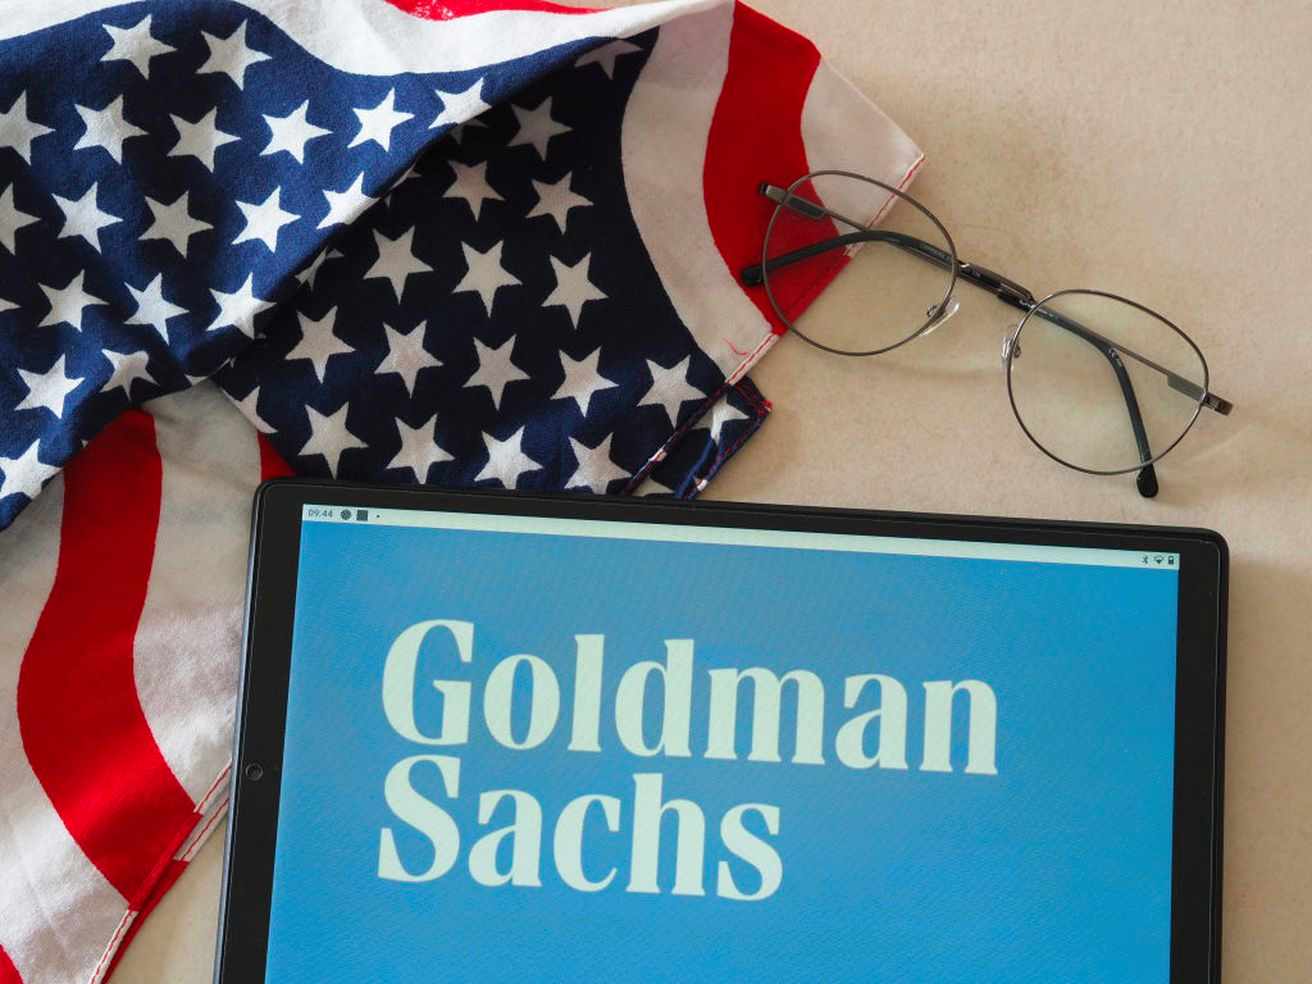 Fed rates: Goldman Sachs revises outlook upwards. More pessimistic on US GDP and employment book